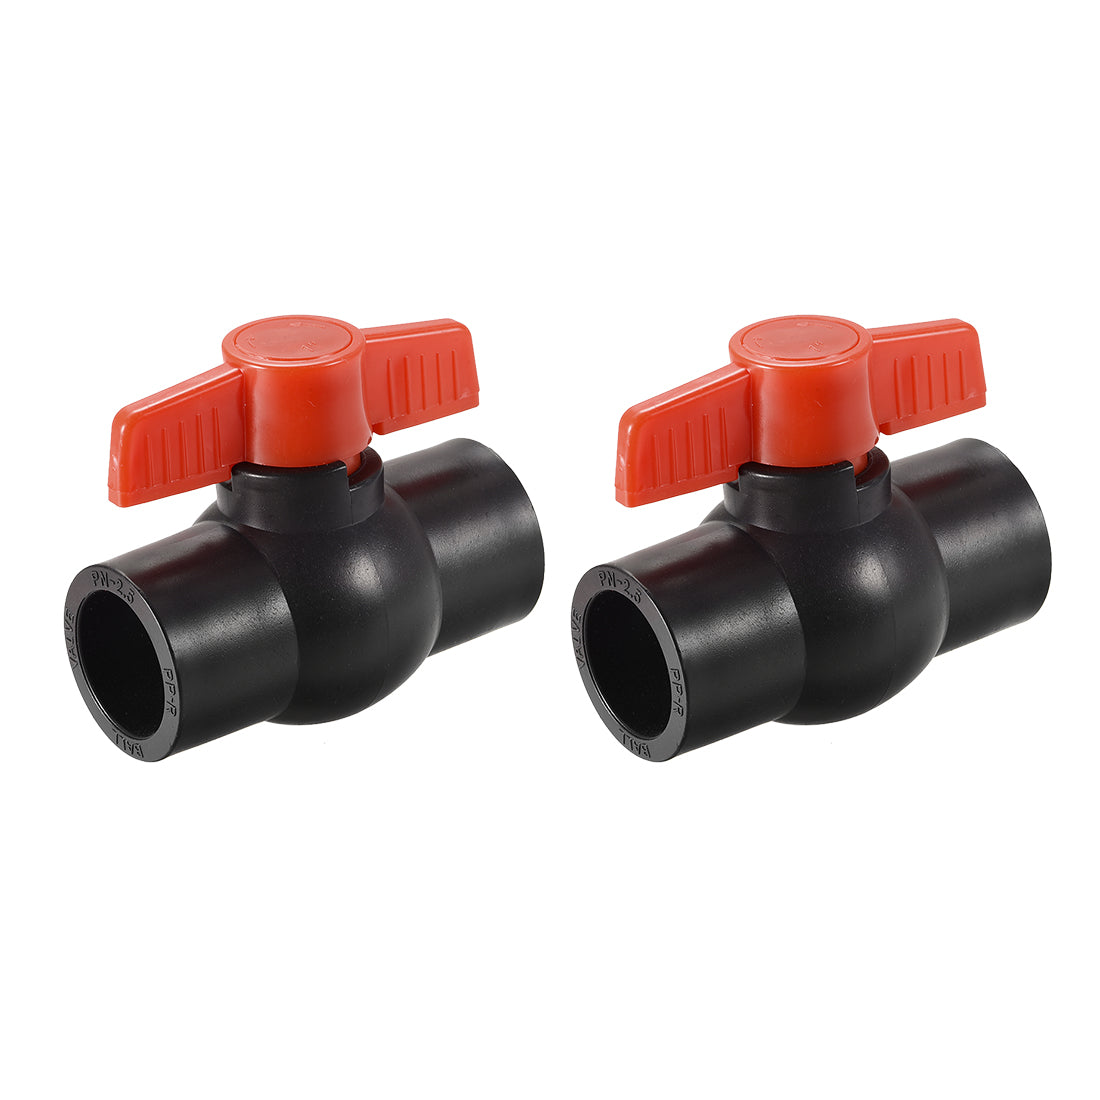 Uxcell Uxcell Ball Valve, 40mm Inner Diameter, Socket Type, for Control Water Flow, PE Black Red 2Pcs